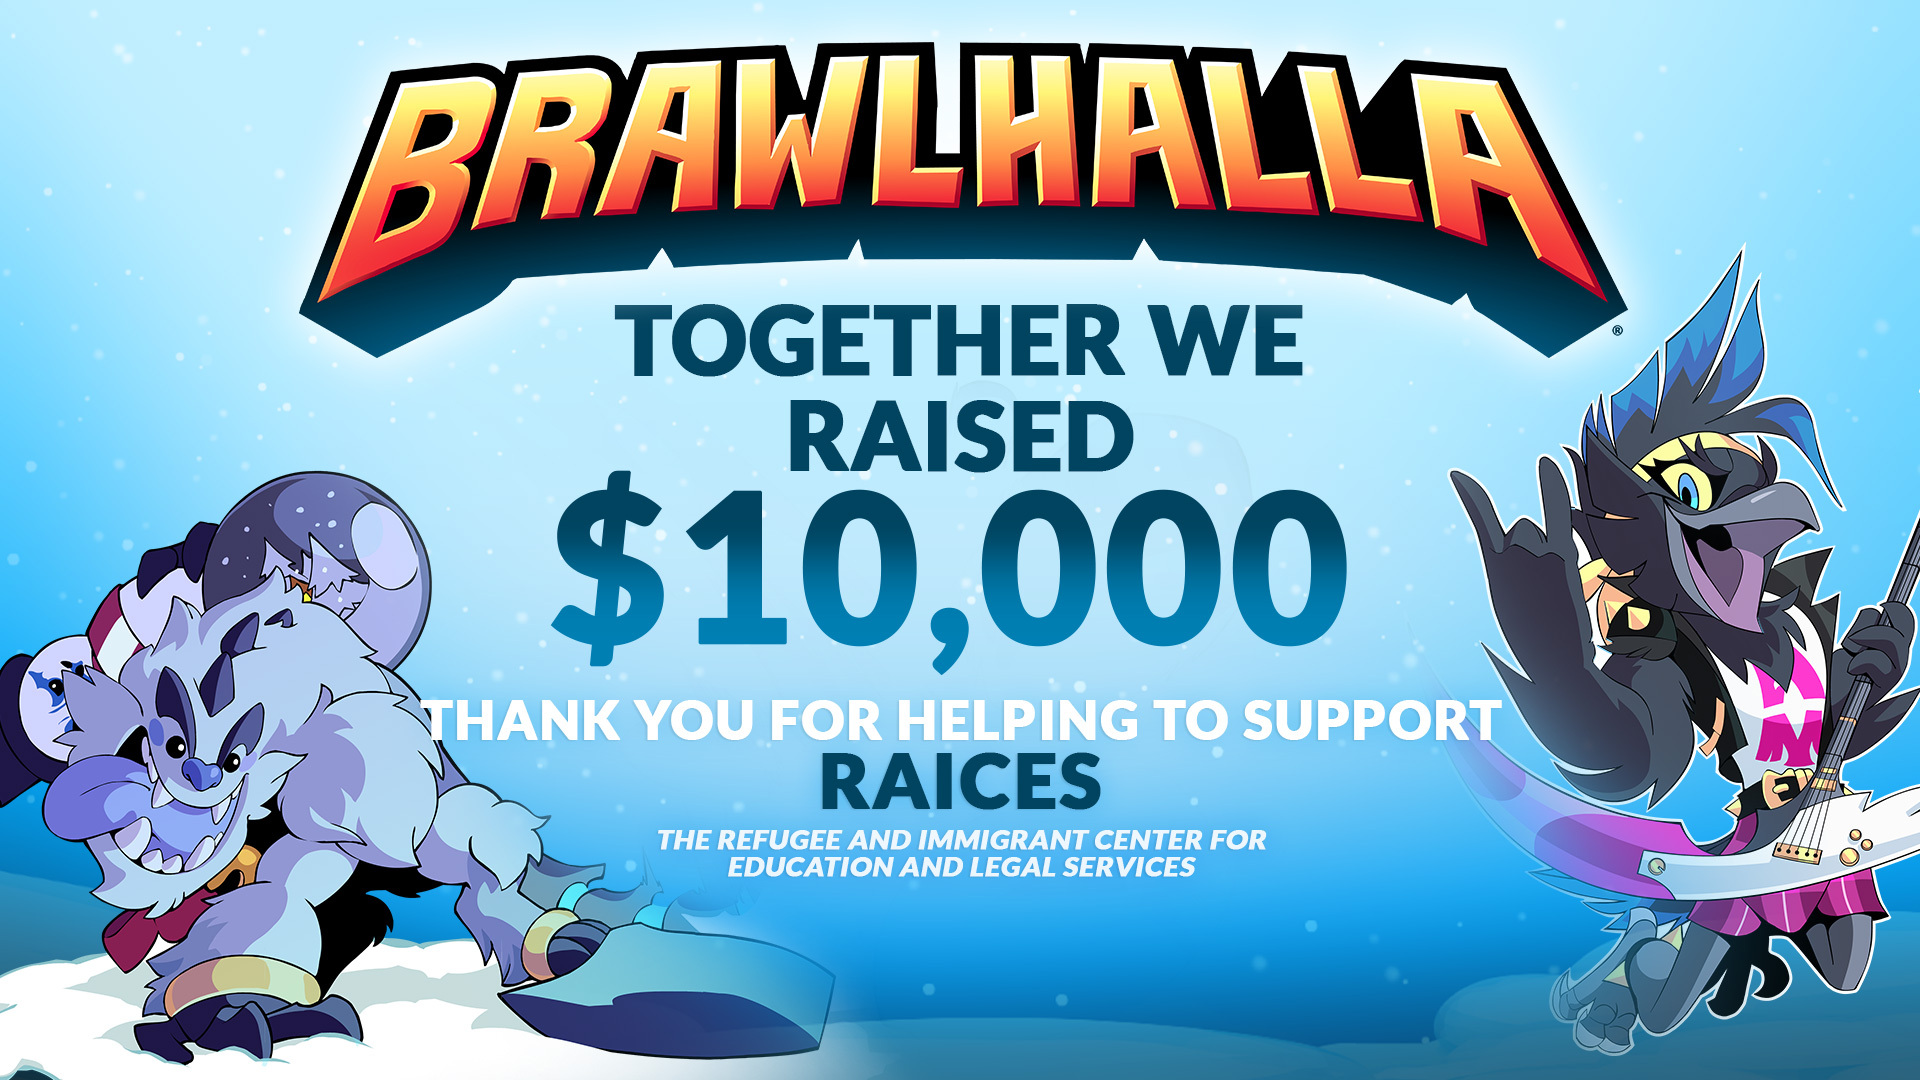 The Brawlhalla Community Raised $10,000 to Help Support RAICES